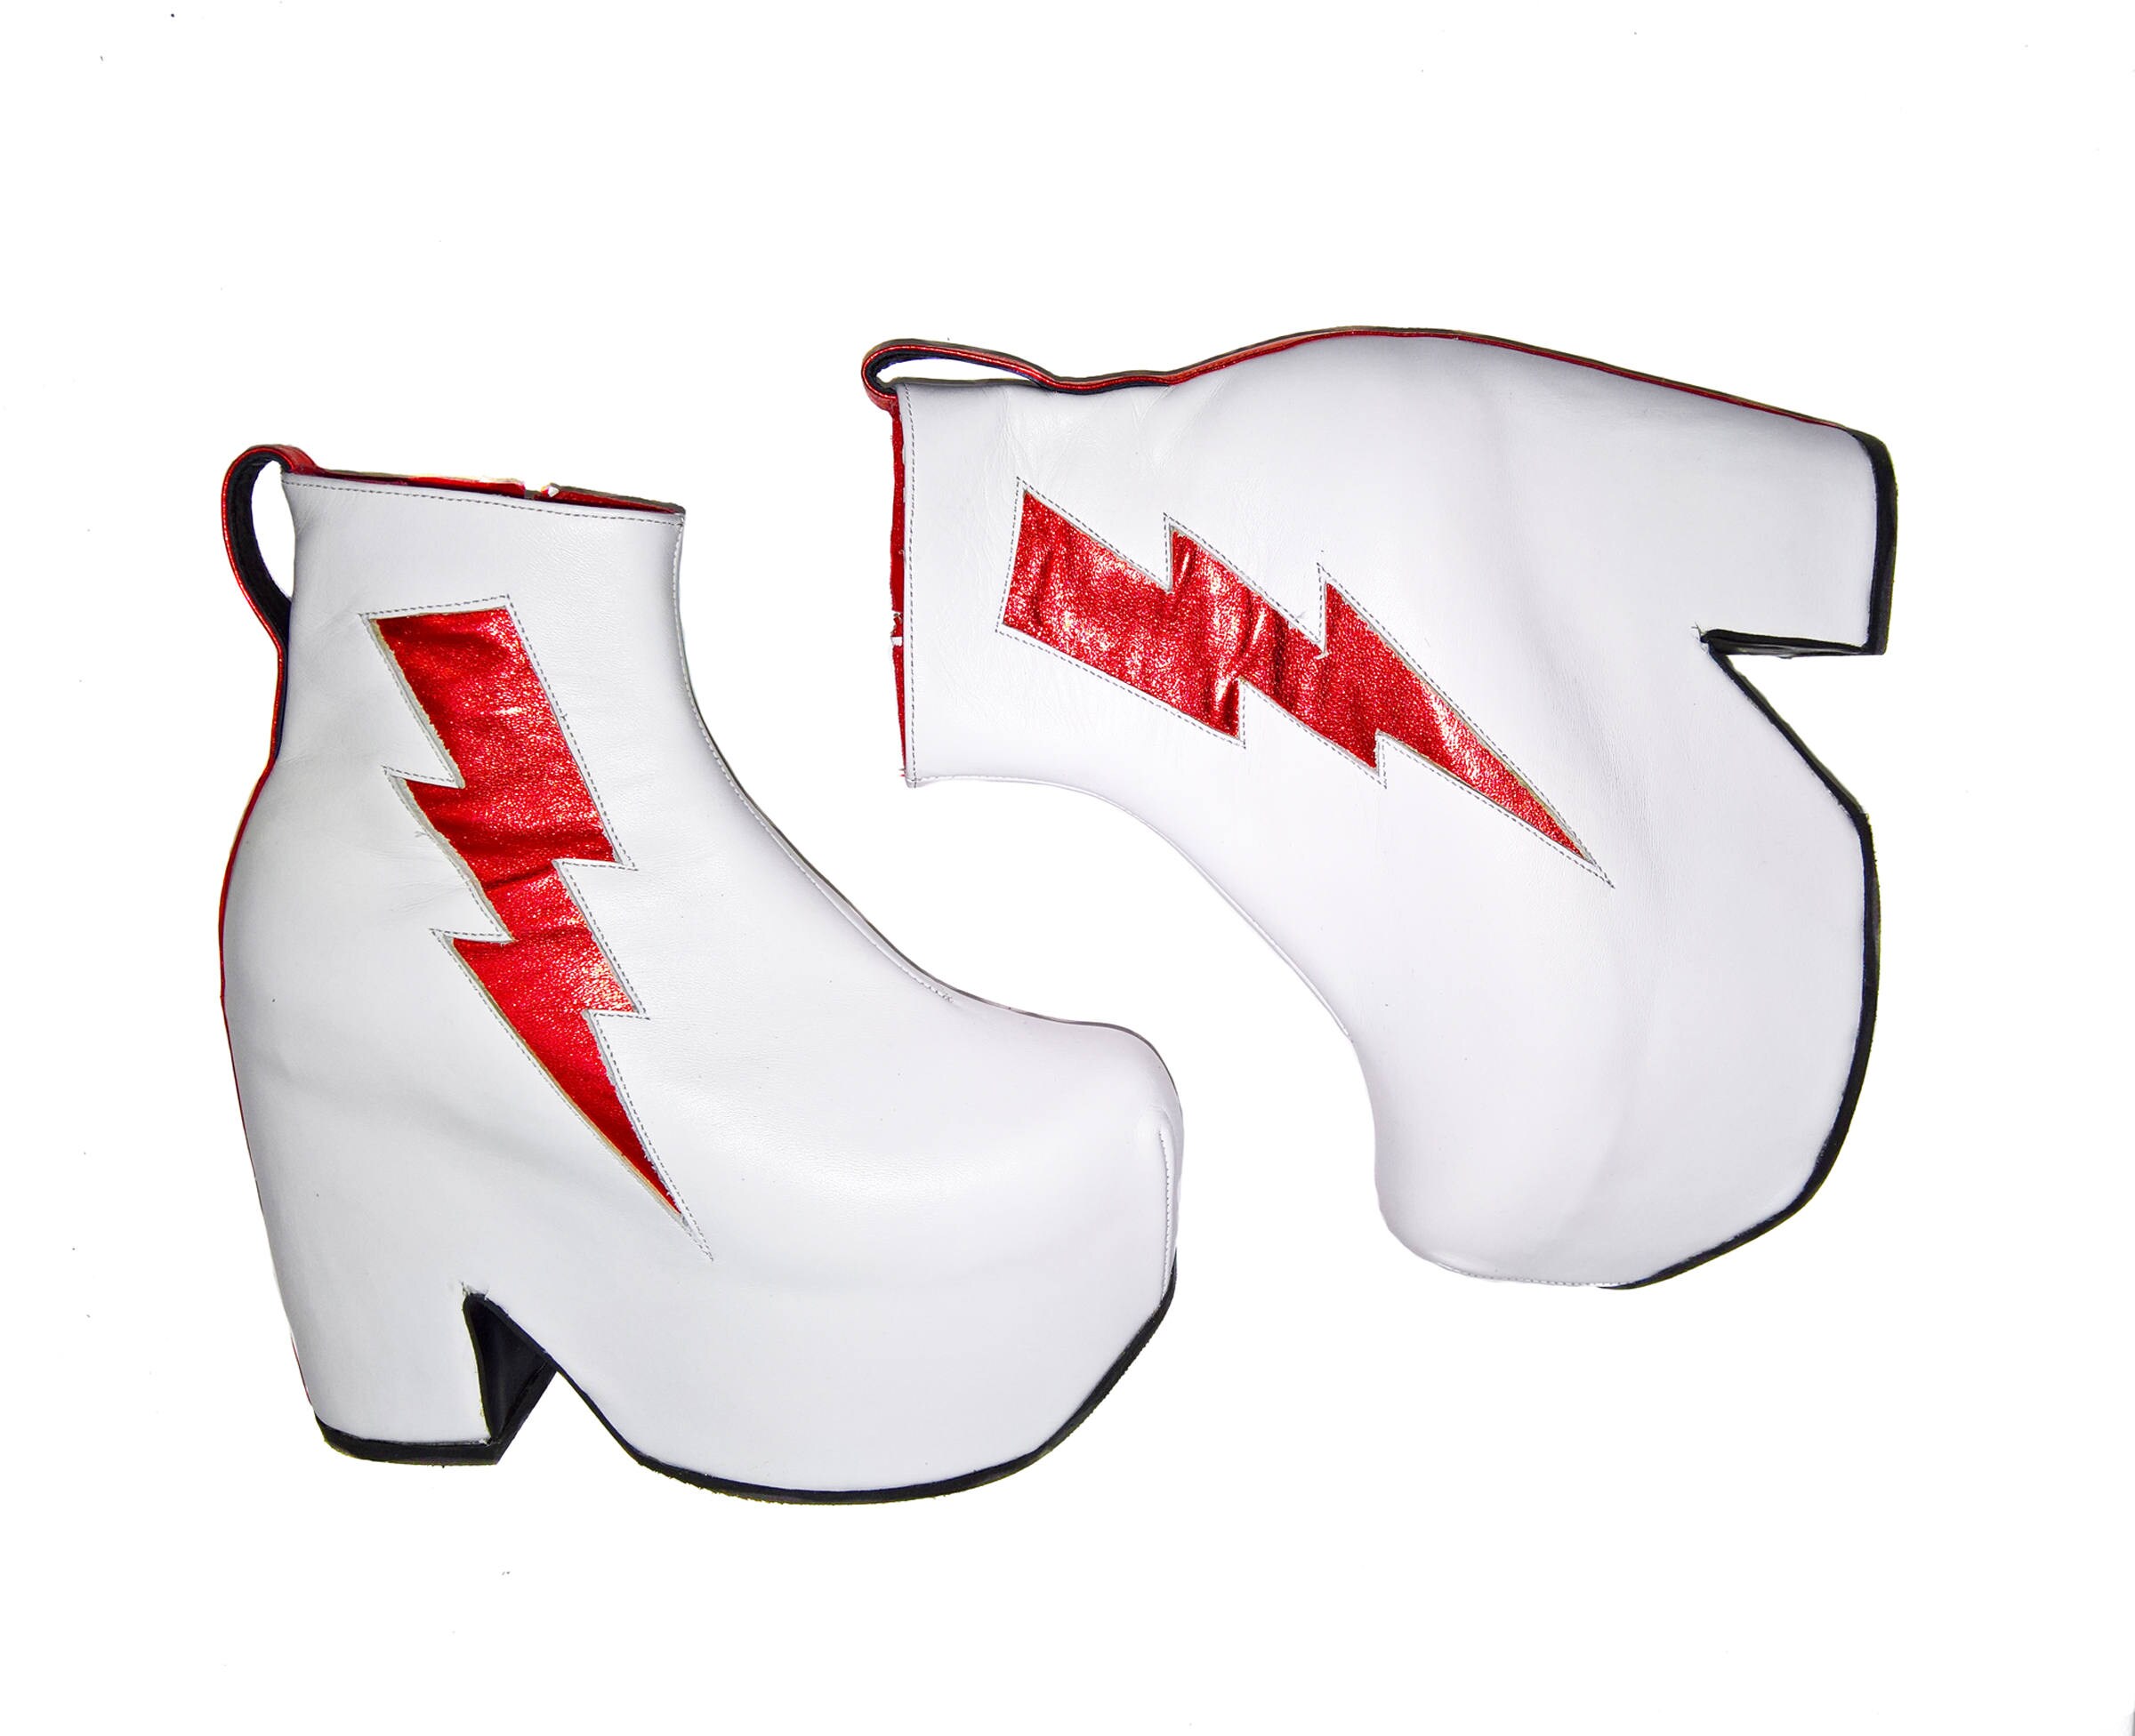 ZIGGY Platform Boots Isabella Mars White Leather With Red - Etsy